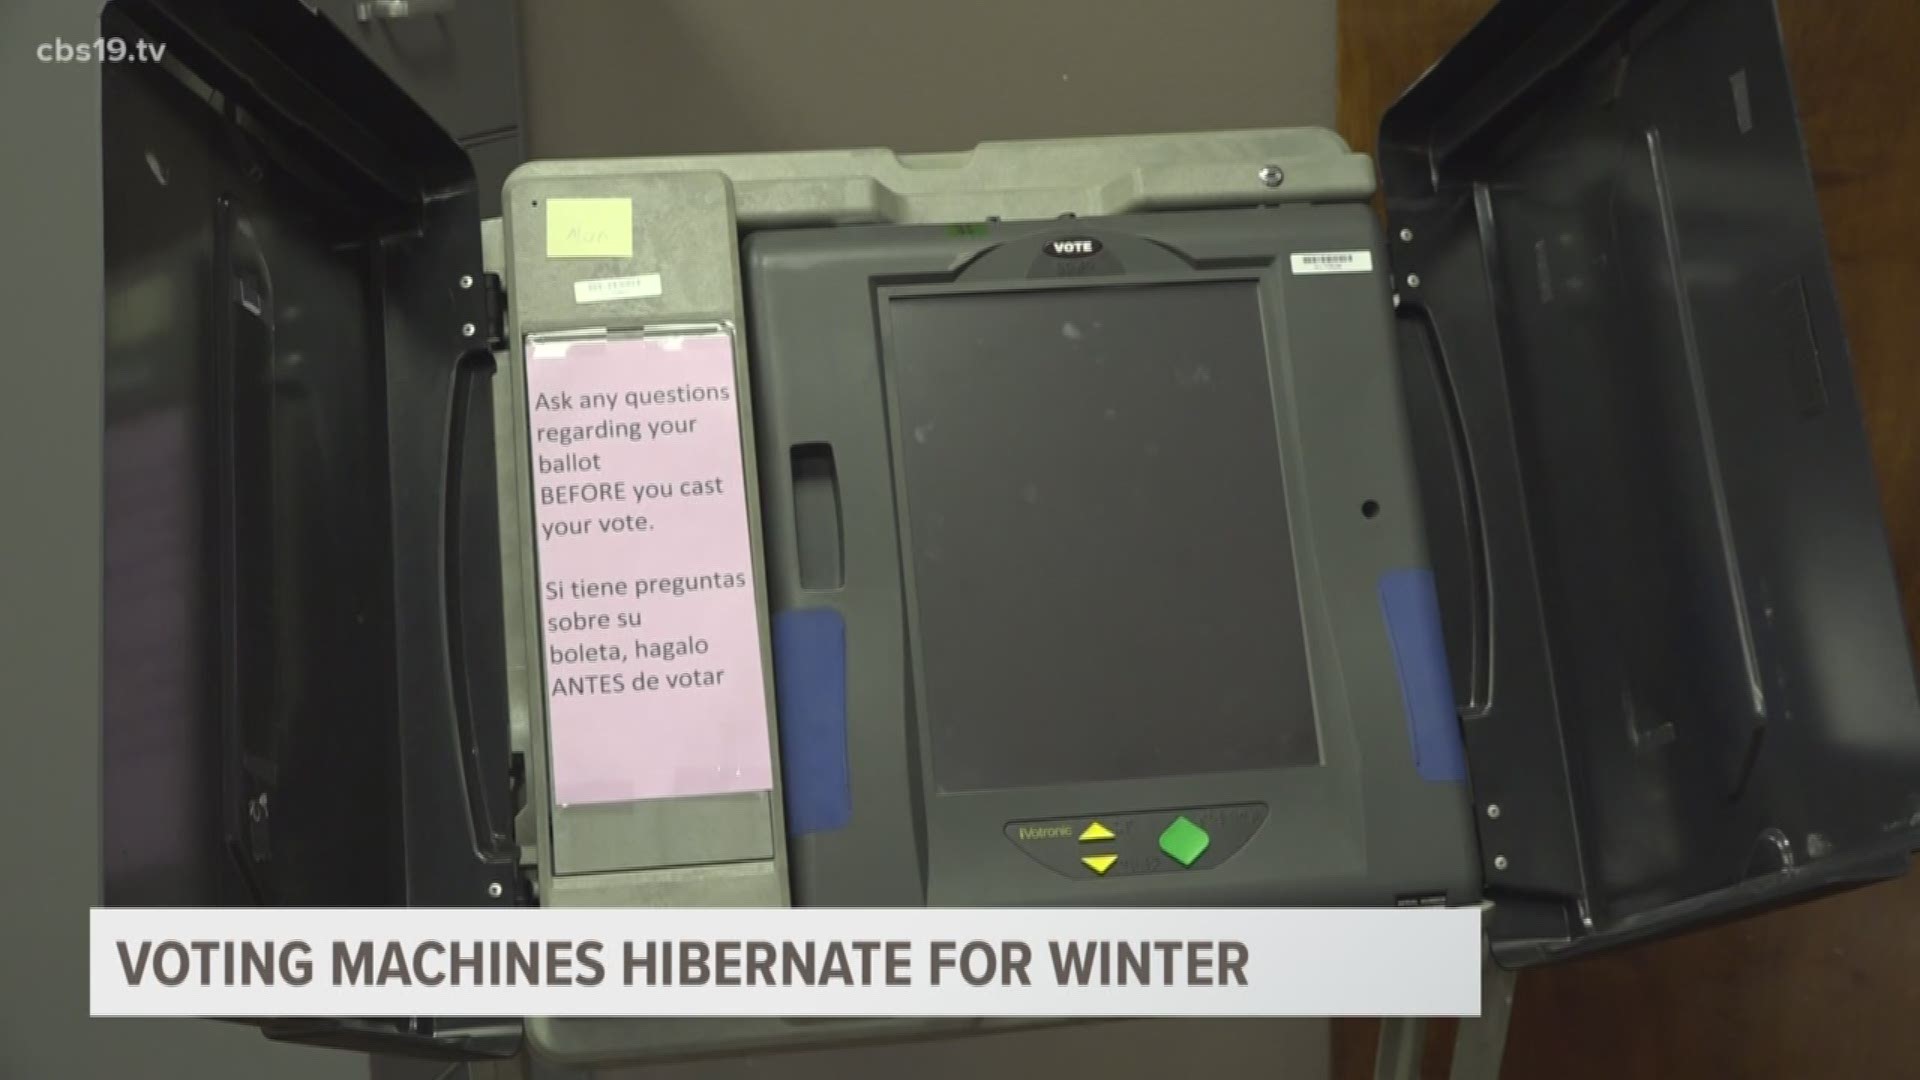 The 2018 midterm election just ended, but what happens to the voting machines?